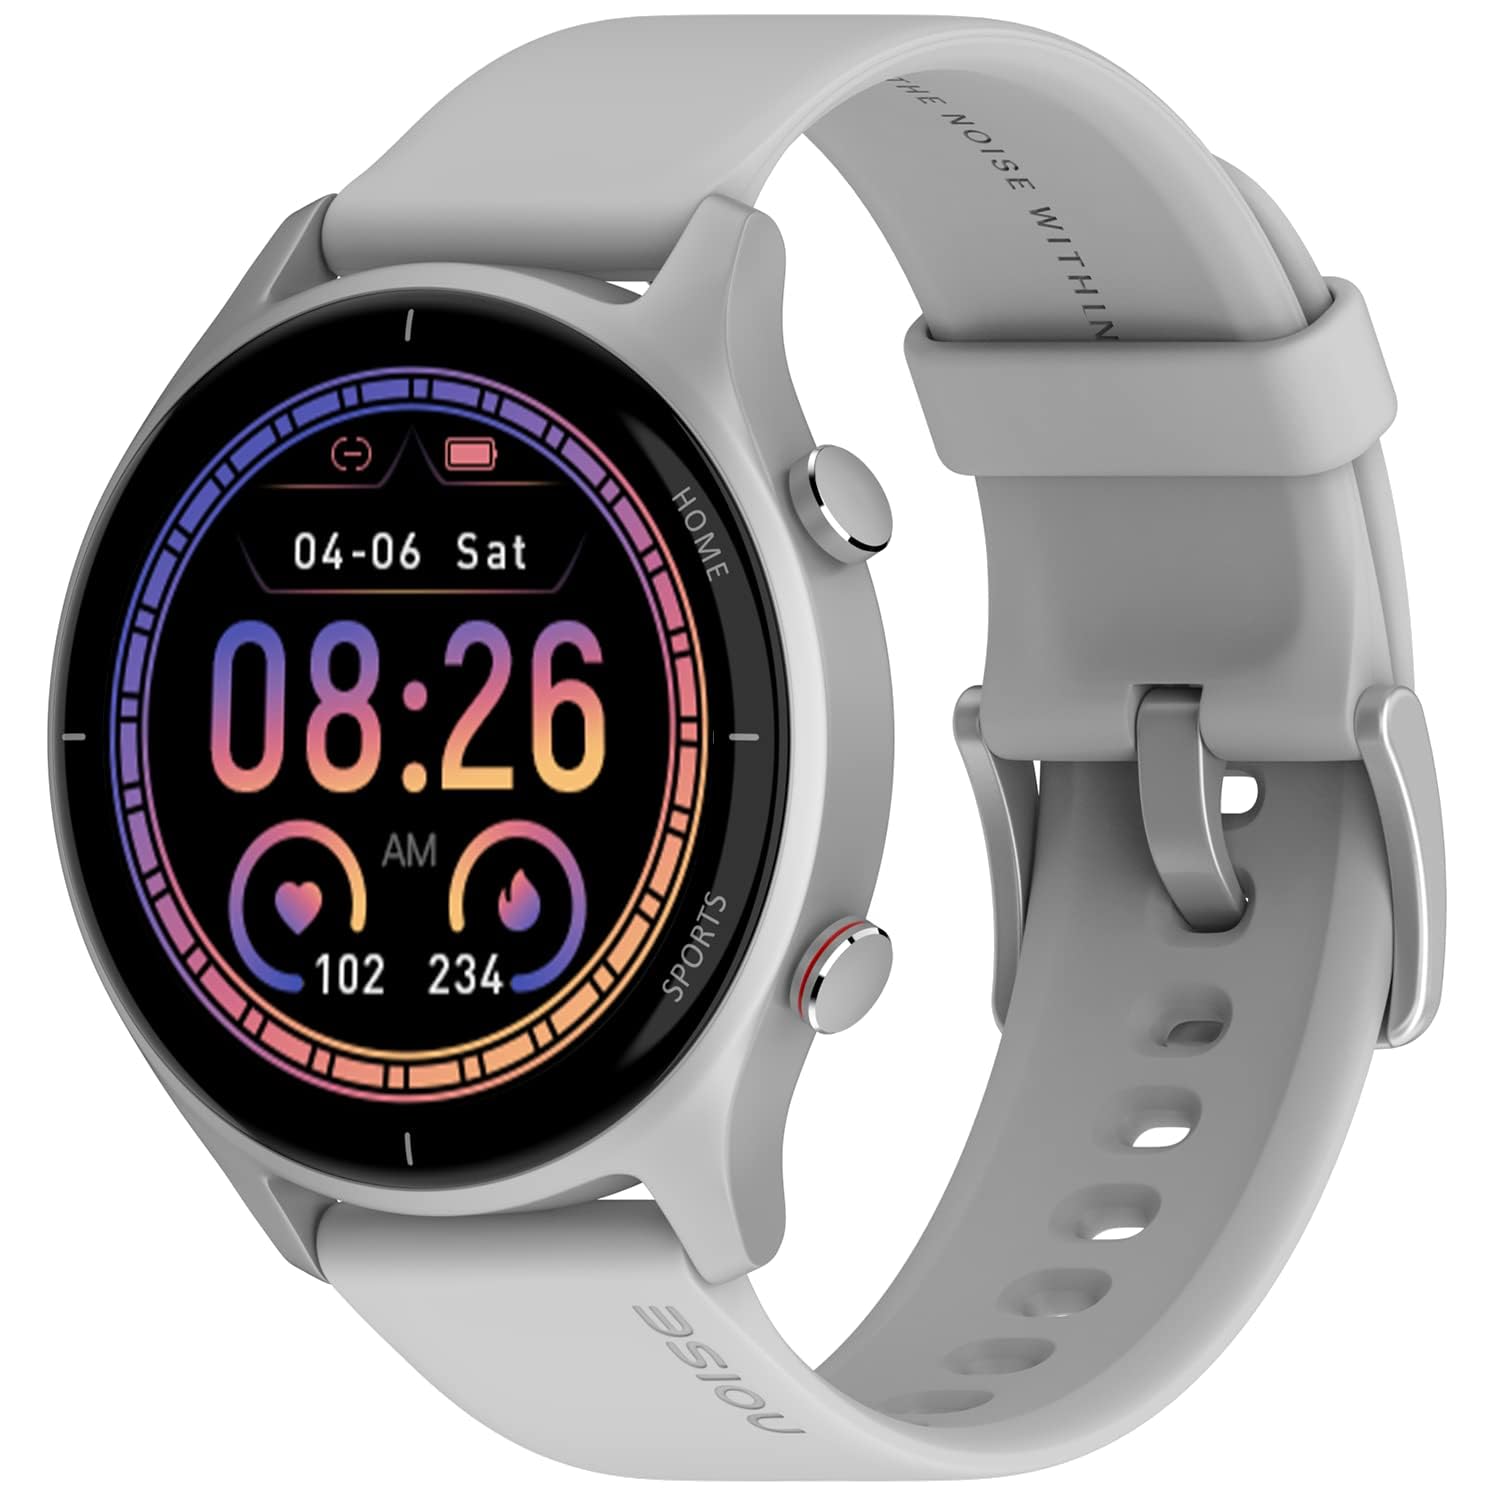 Noise Newly Launched Twist Round Dial Smart Watch with Bluetooth Calling, 1.38" TFT Display, Up-to 7 Days Battery, 100+ Watch Faces, IP68, Heart Rate Monitor, Sleep Tracking (Silver Grey)